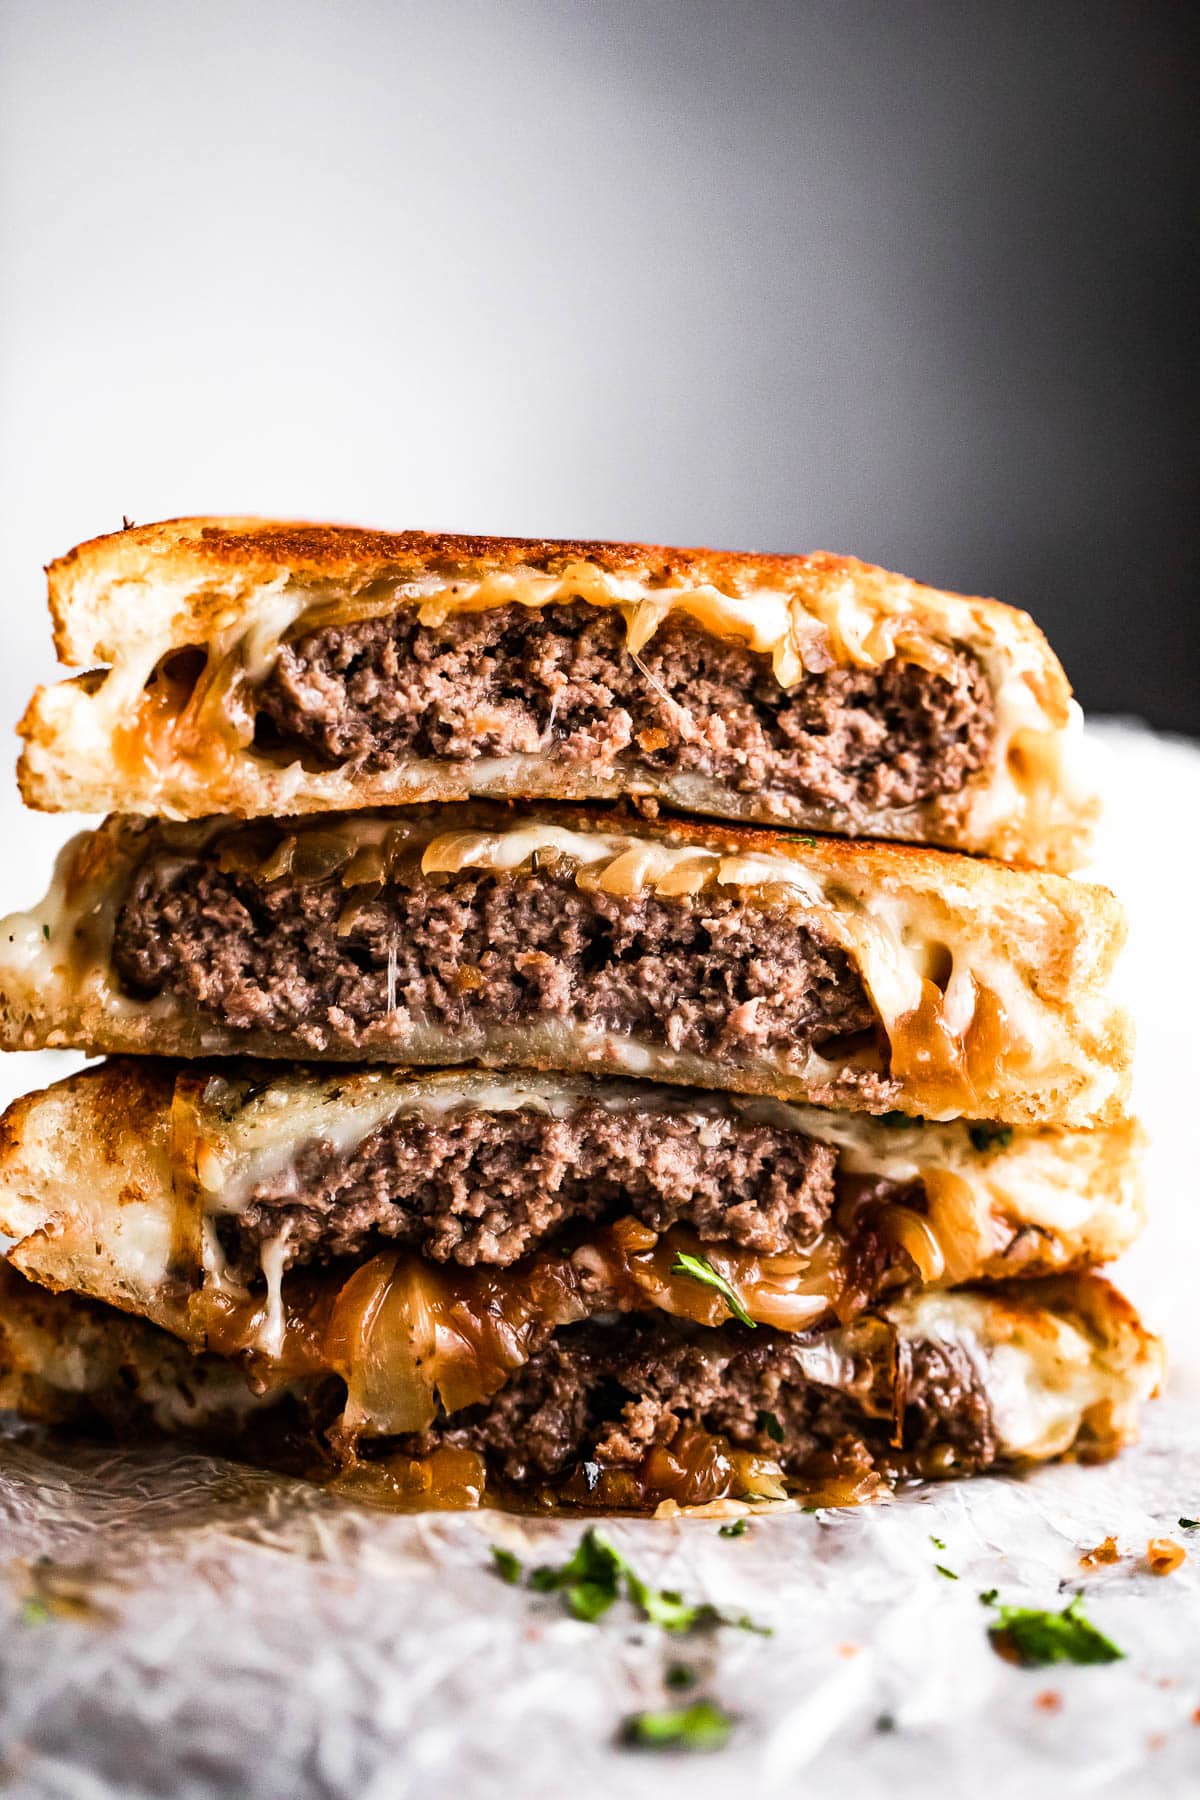 Classic patty melts cut in half and stacked.